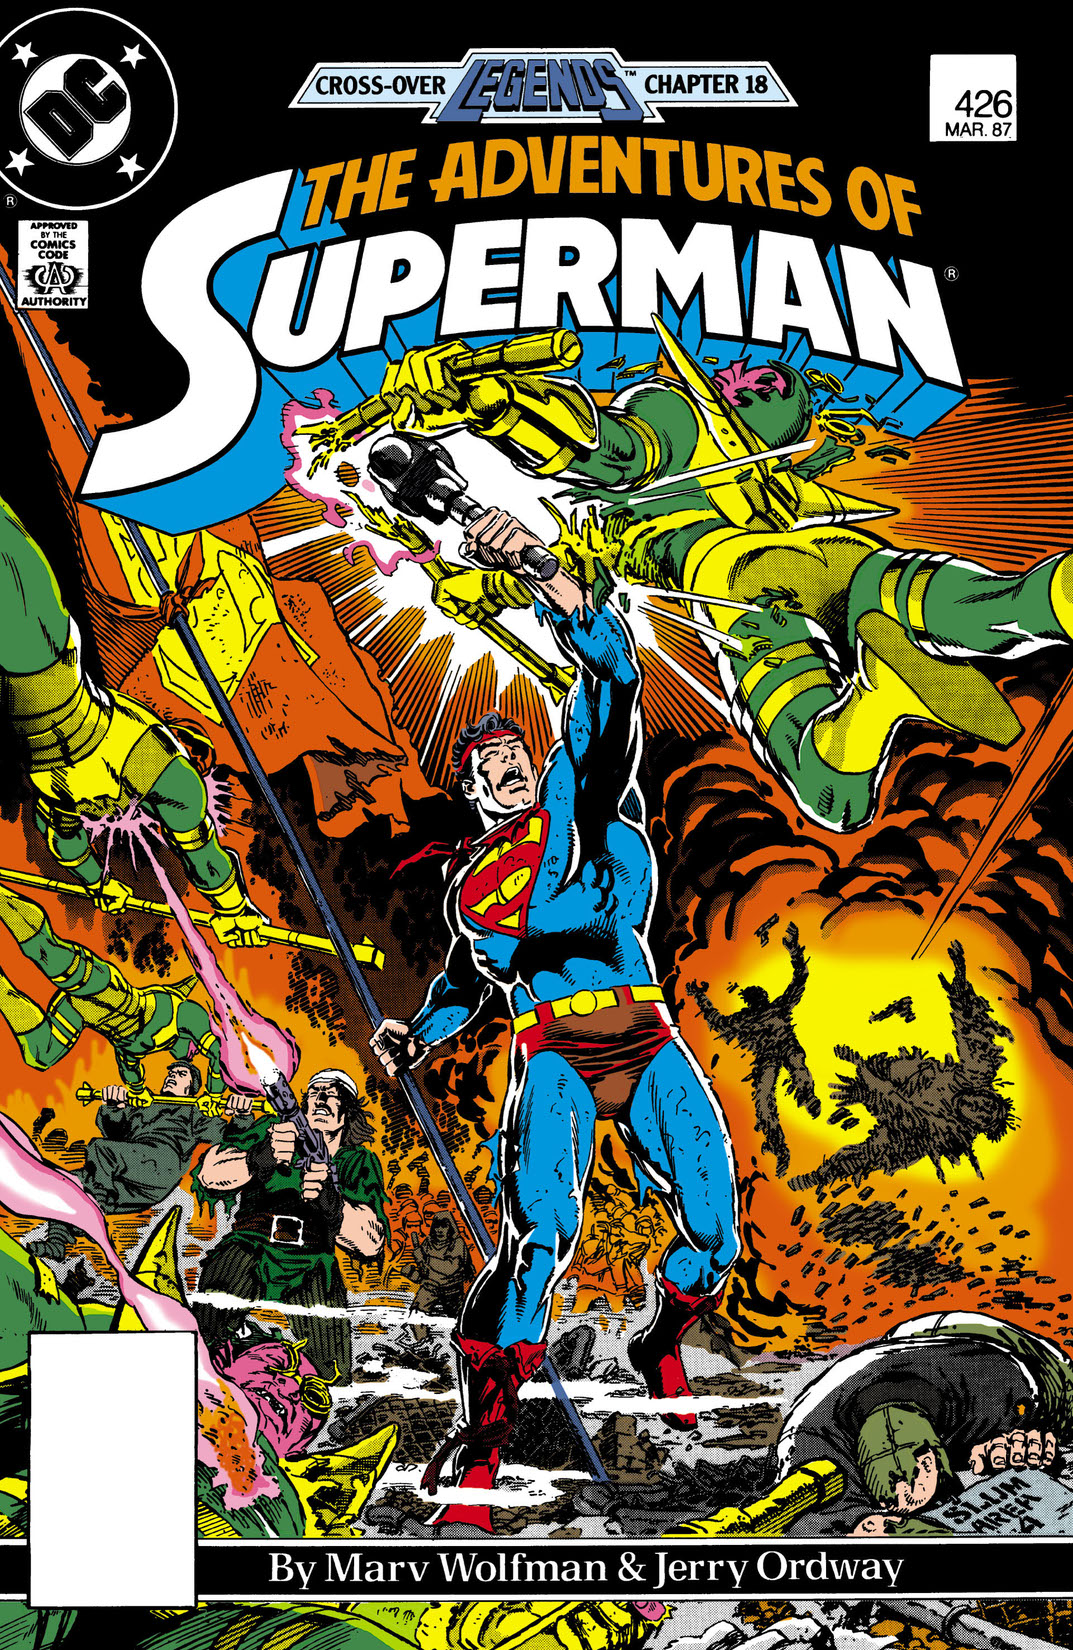 Adventures of Superman (1987-2006) #426 preview images